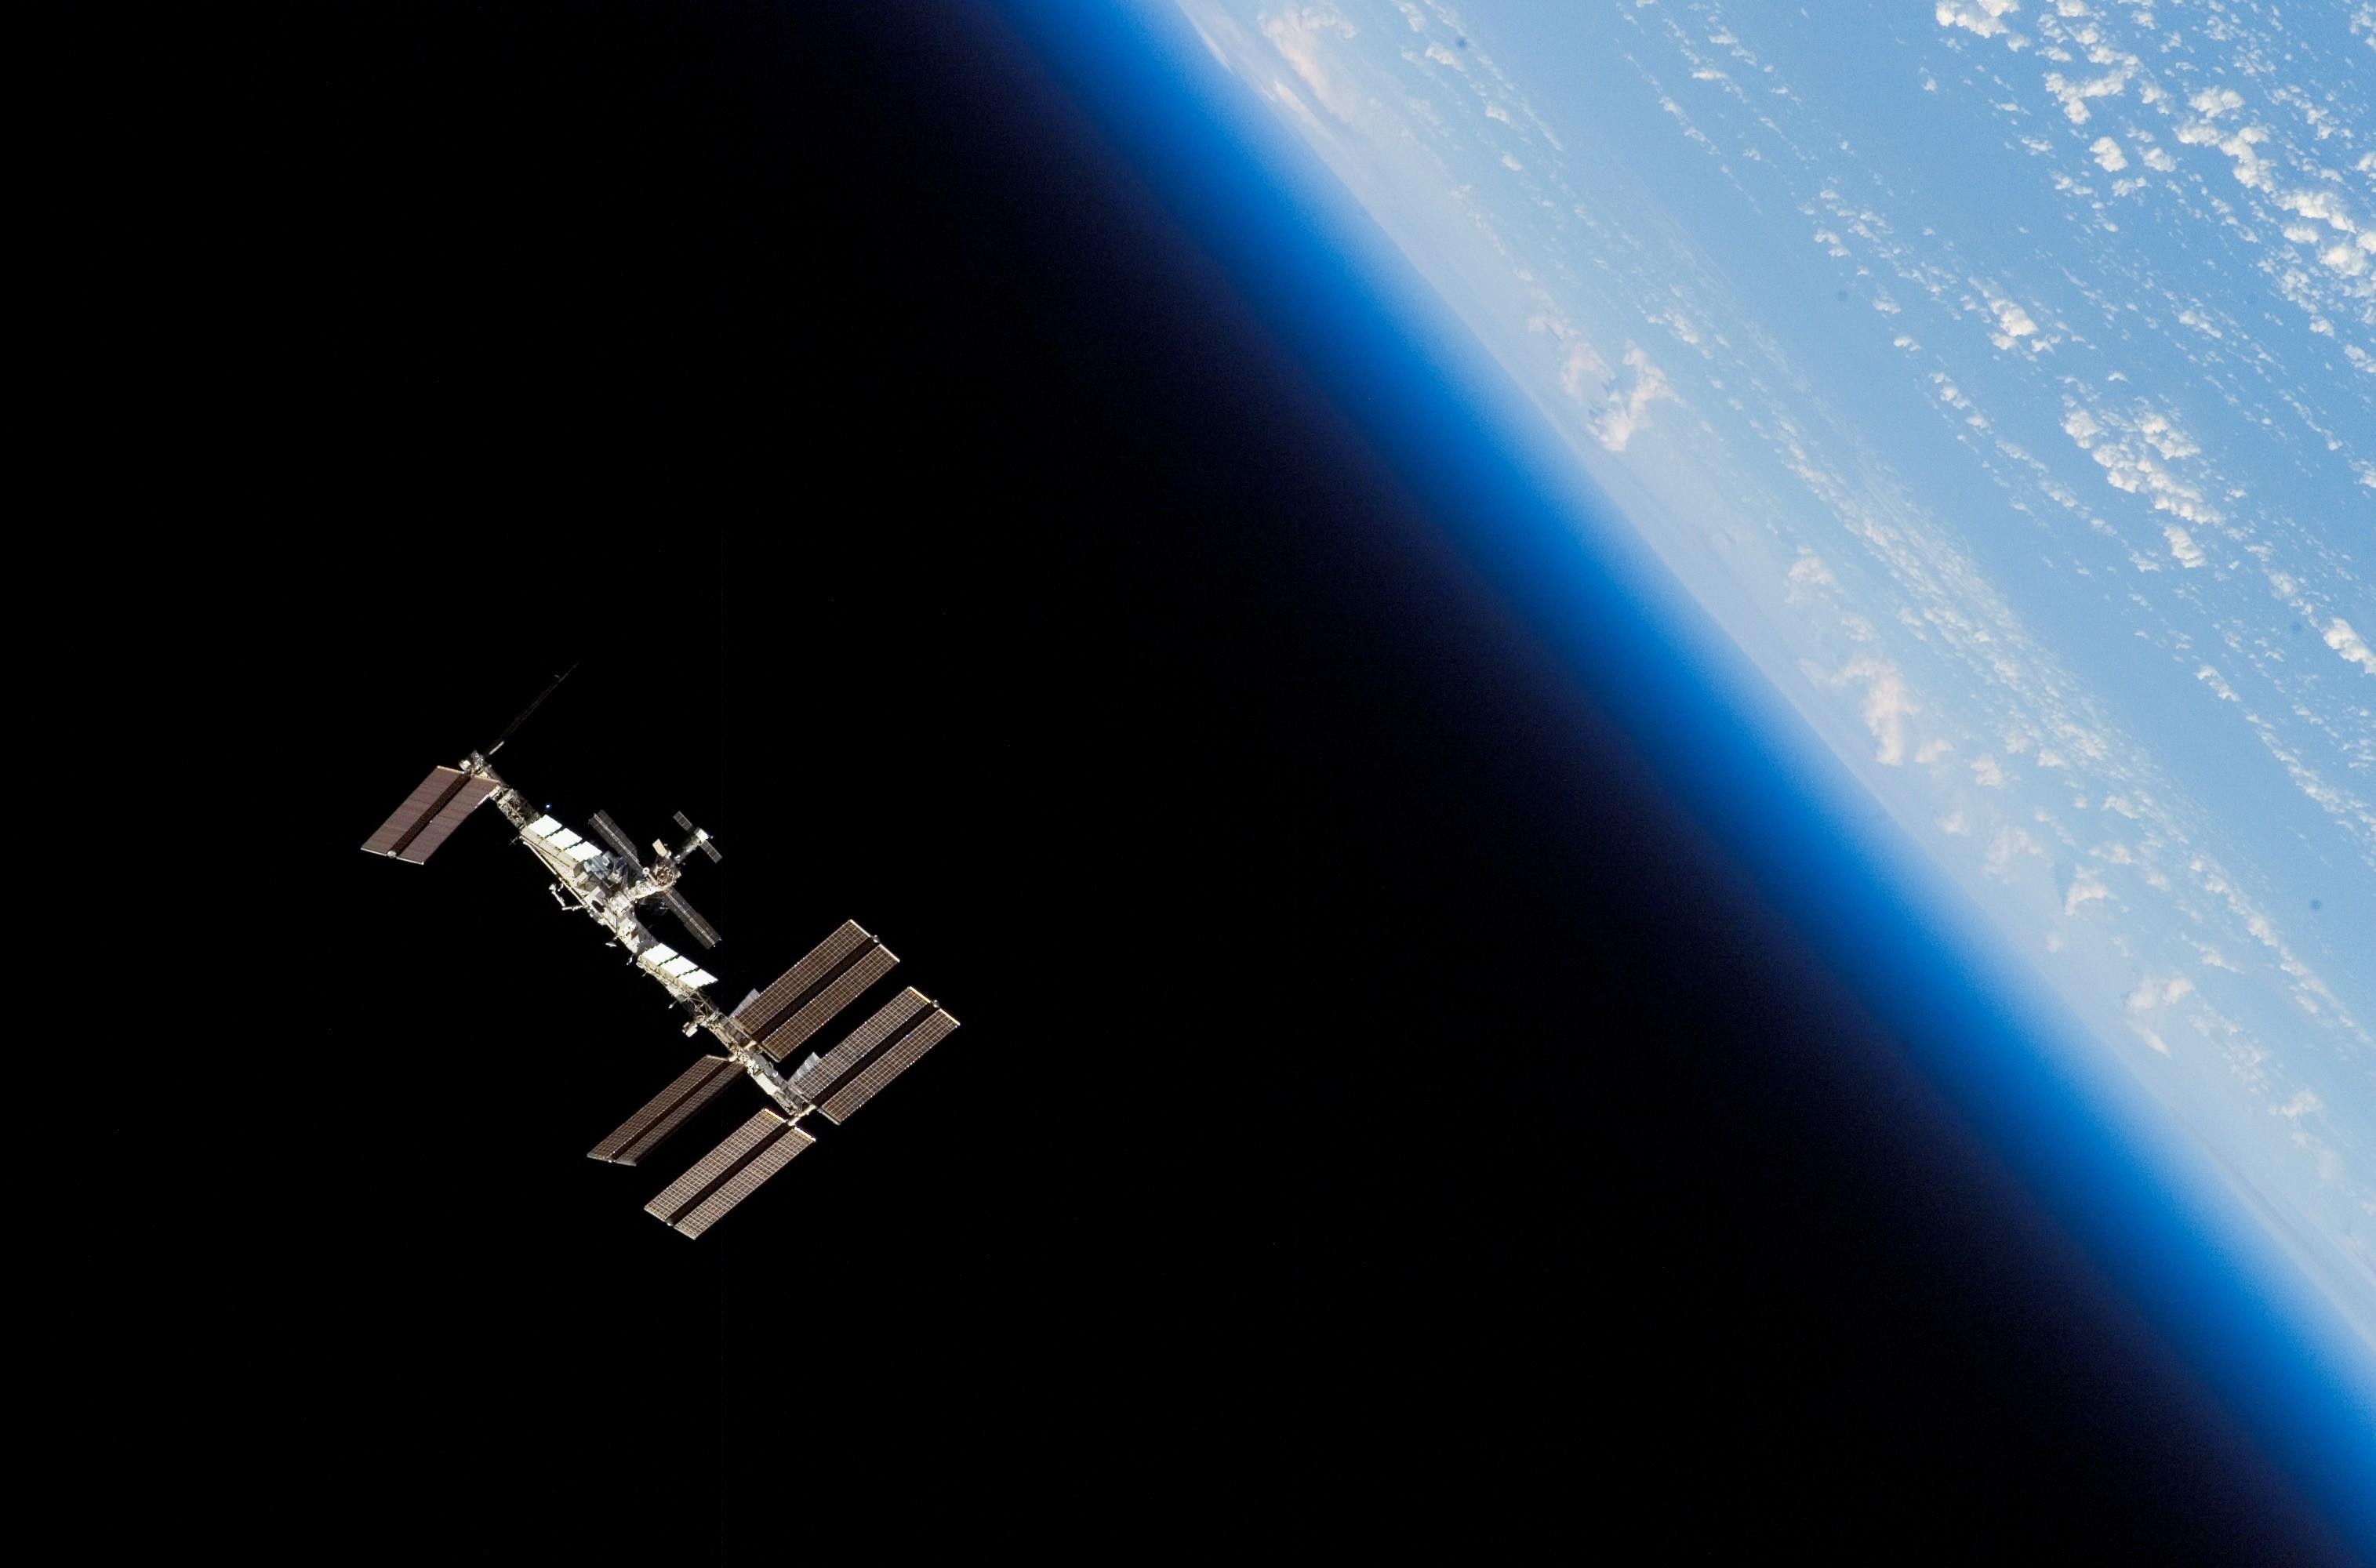 universe, land, earth, planet, orbit, iss station, mss station